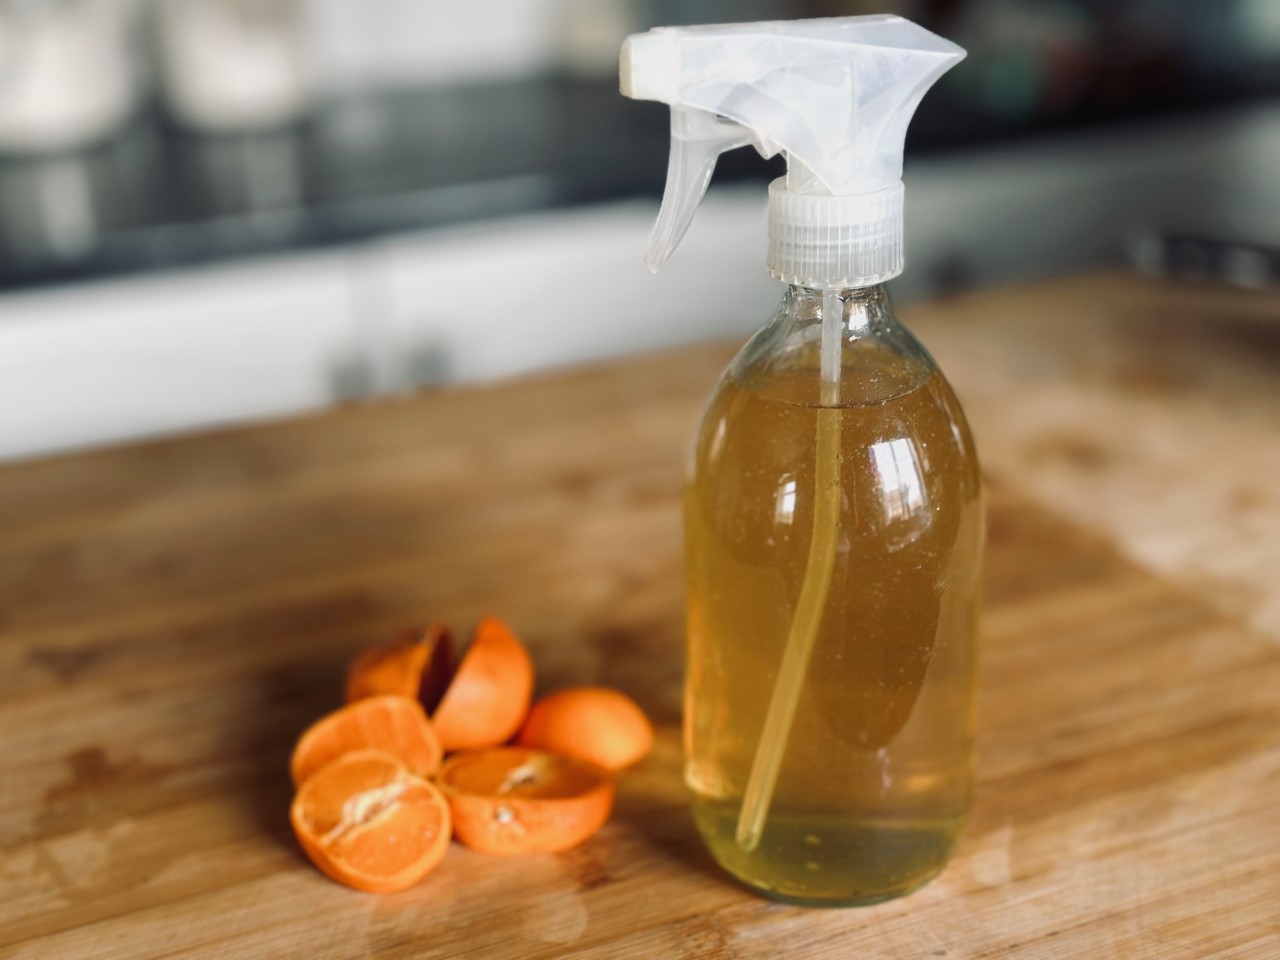 A glass spray bottle next to orange slices on a wooden chopping board